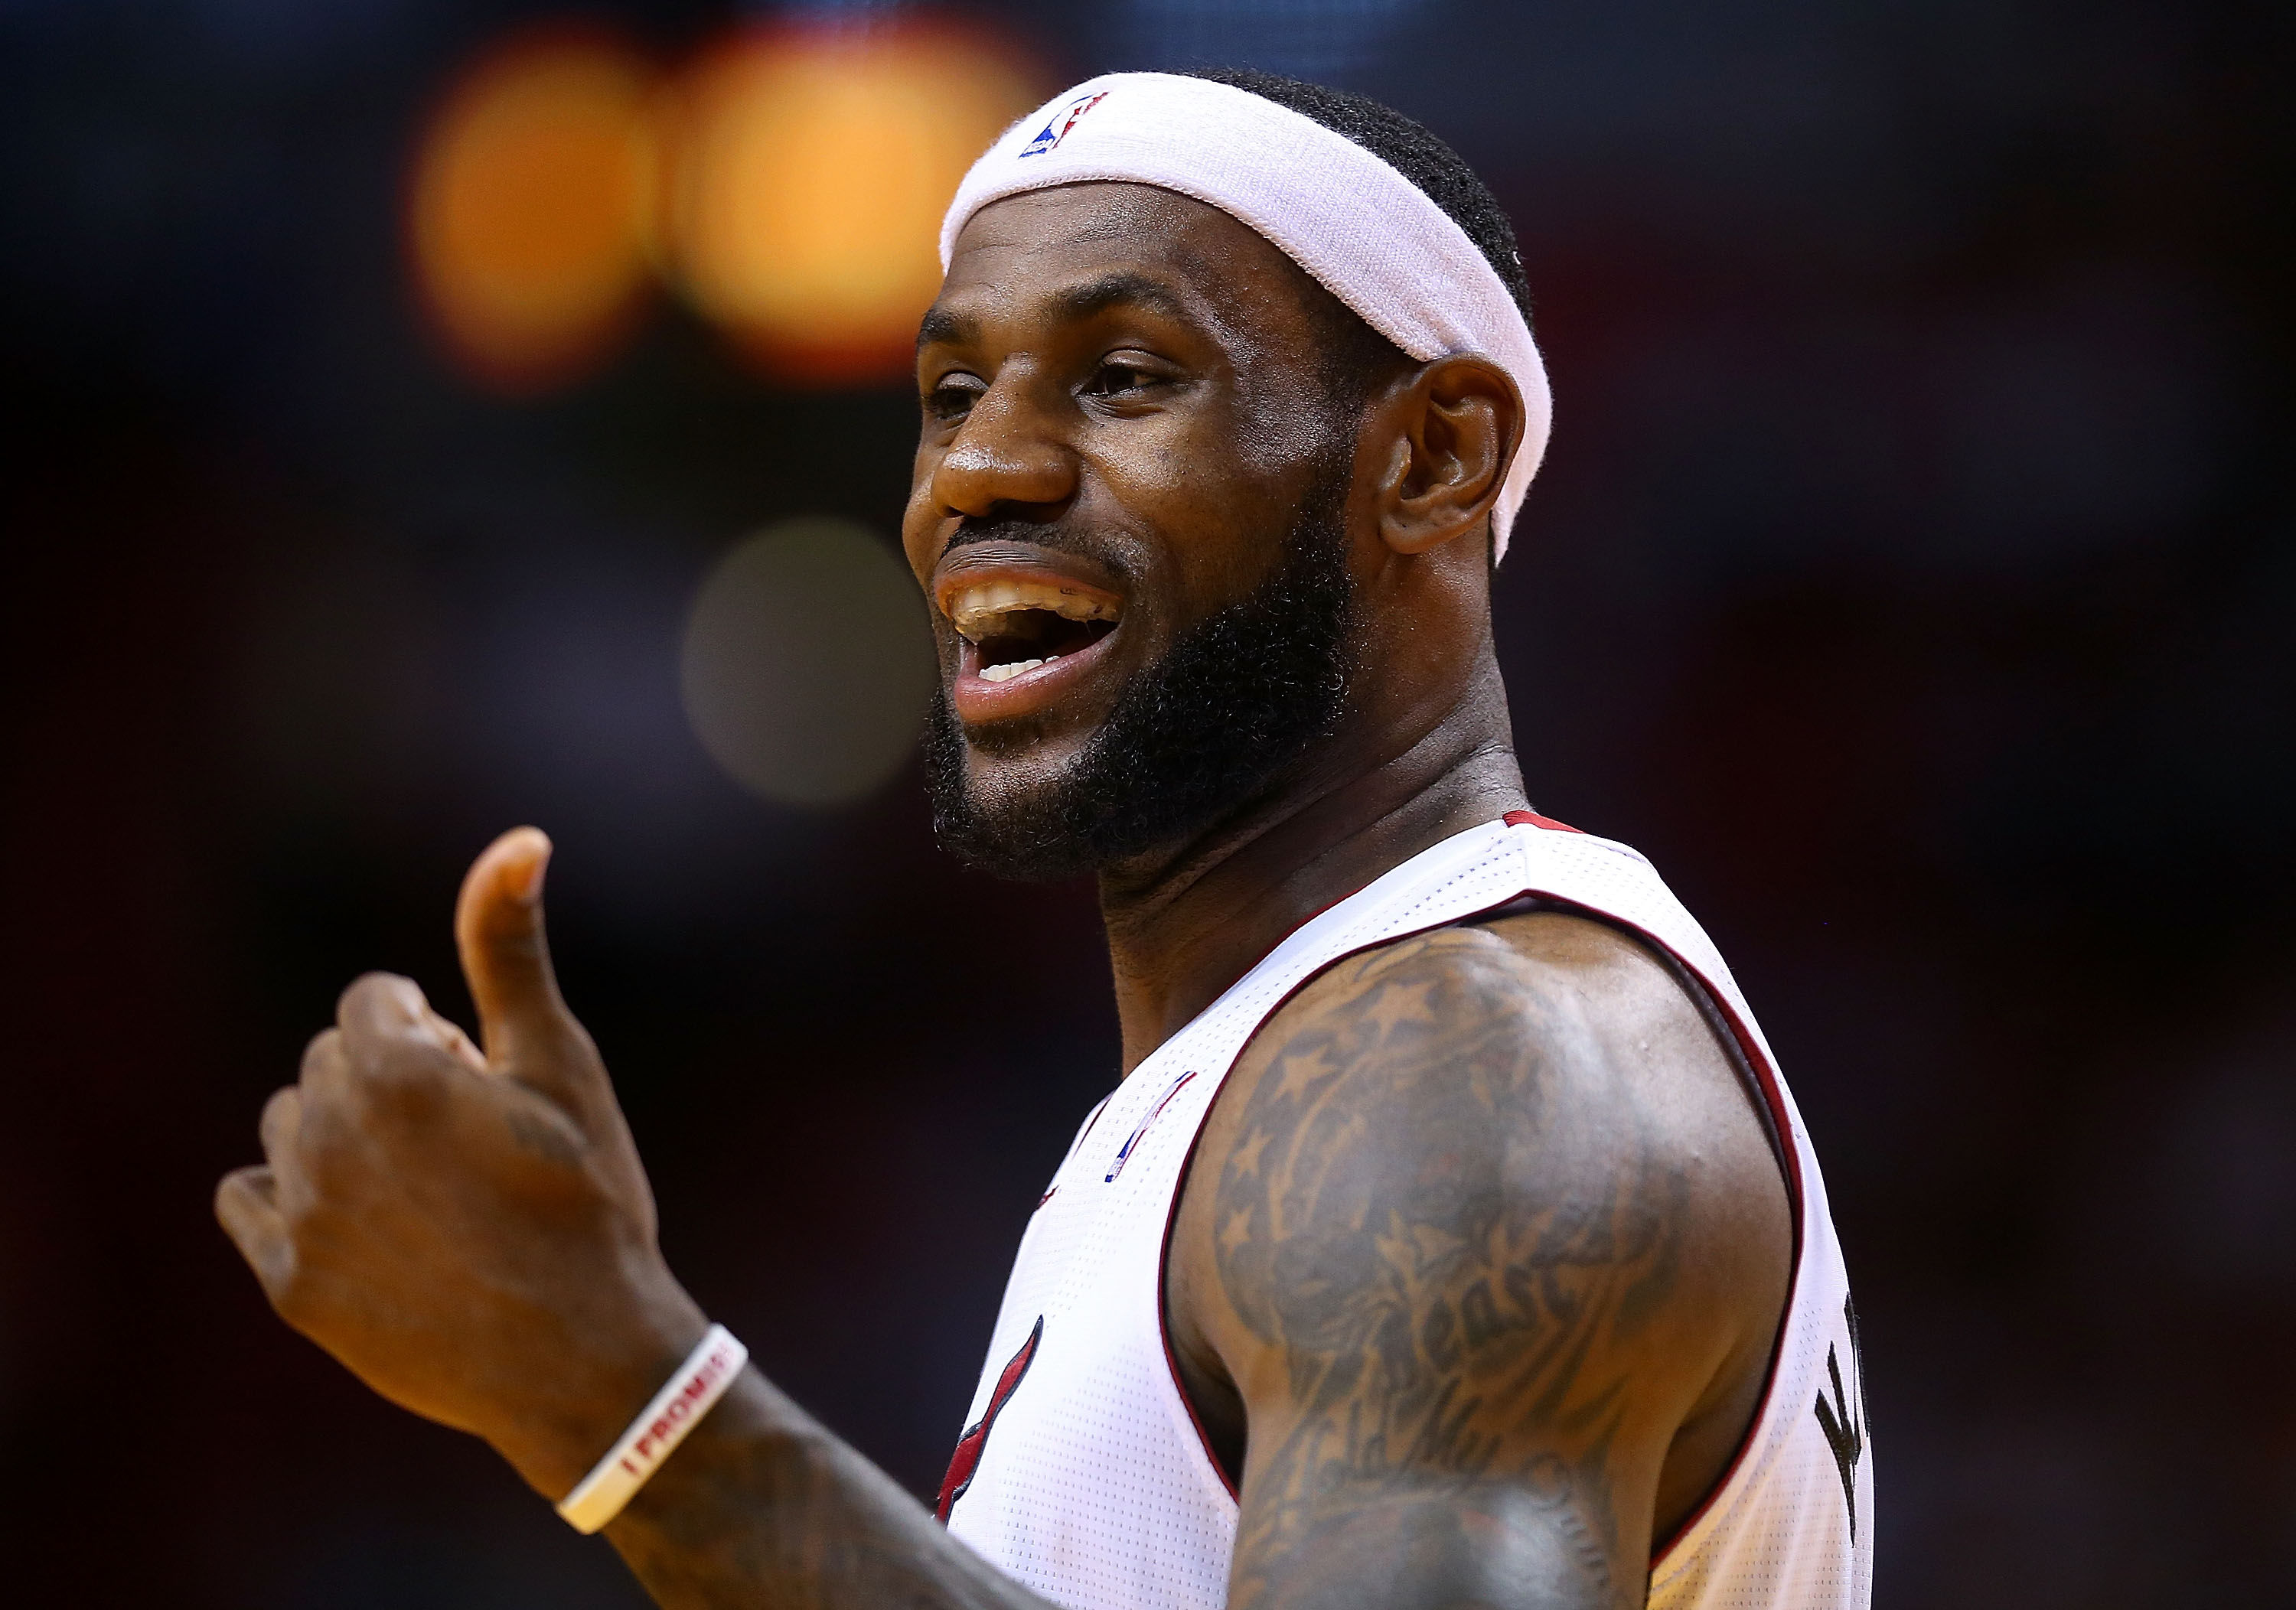 LeBron James during a game at American Airlines Arena in Miami, March 12, 2014. (Mike Ehrmann—Getty Images)